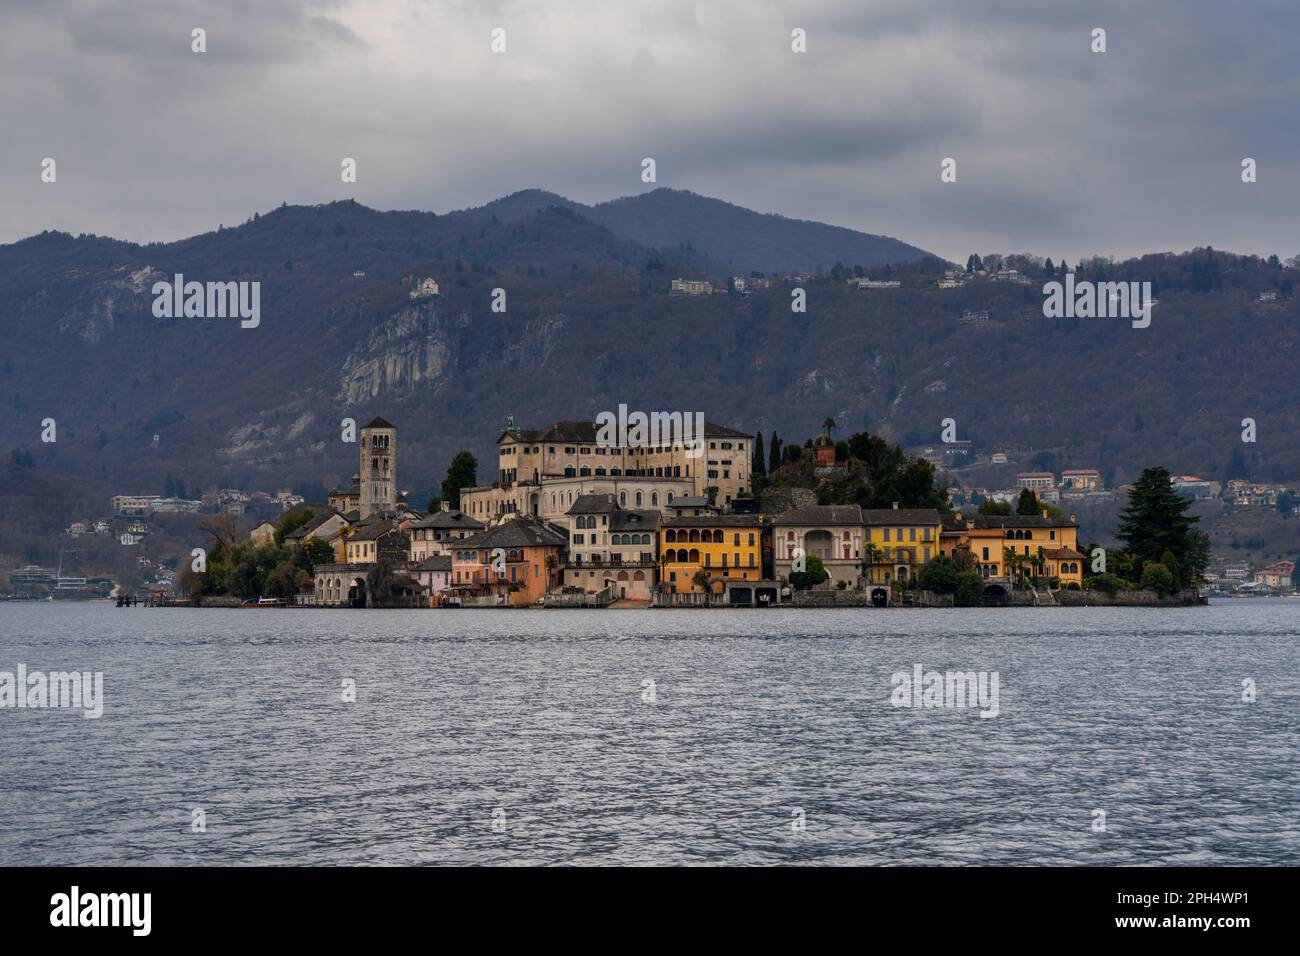 A view of Lake Orta and the Isola San Guilio islet with its historic buildings Stock Photo